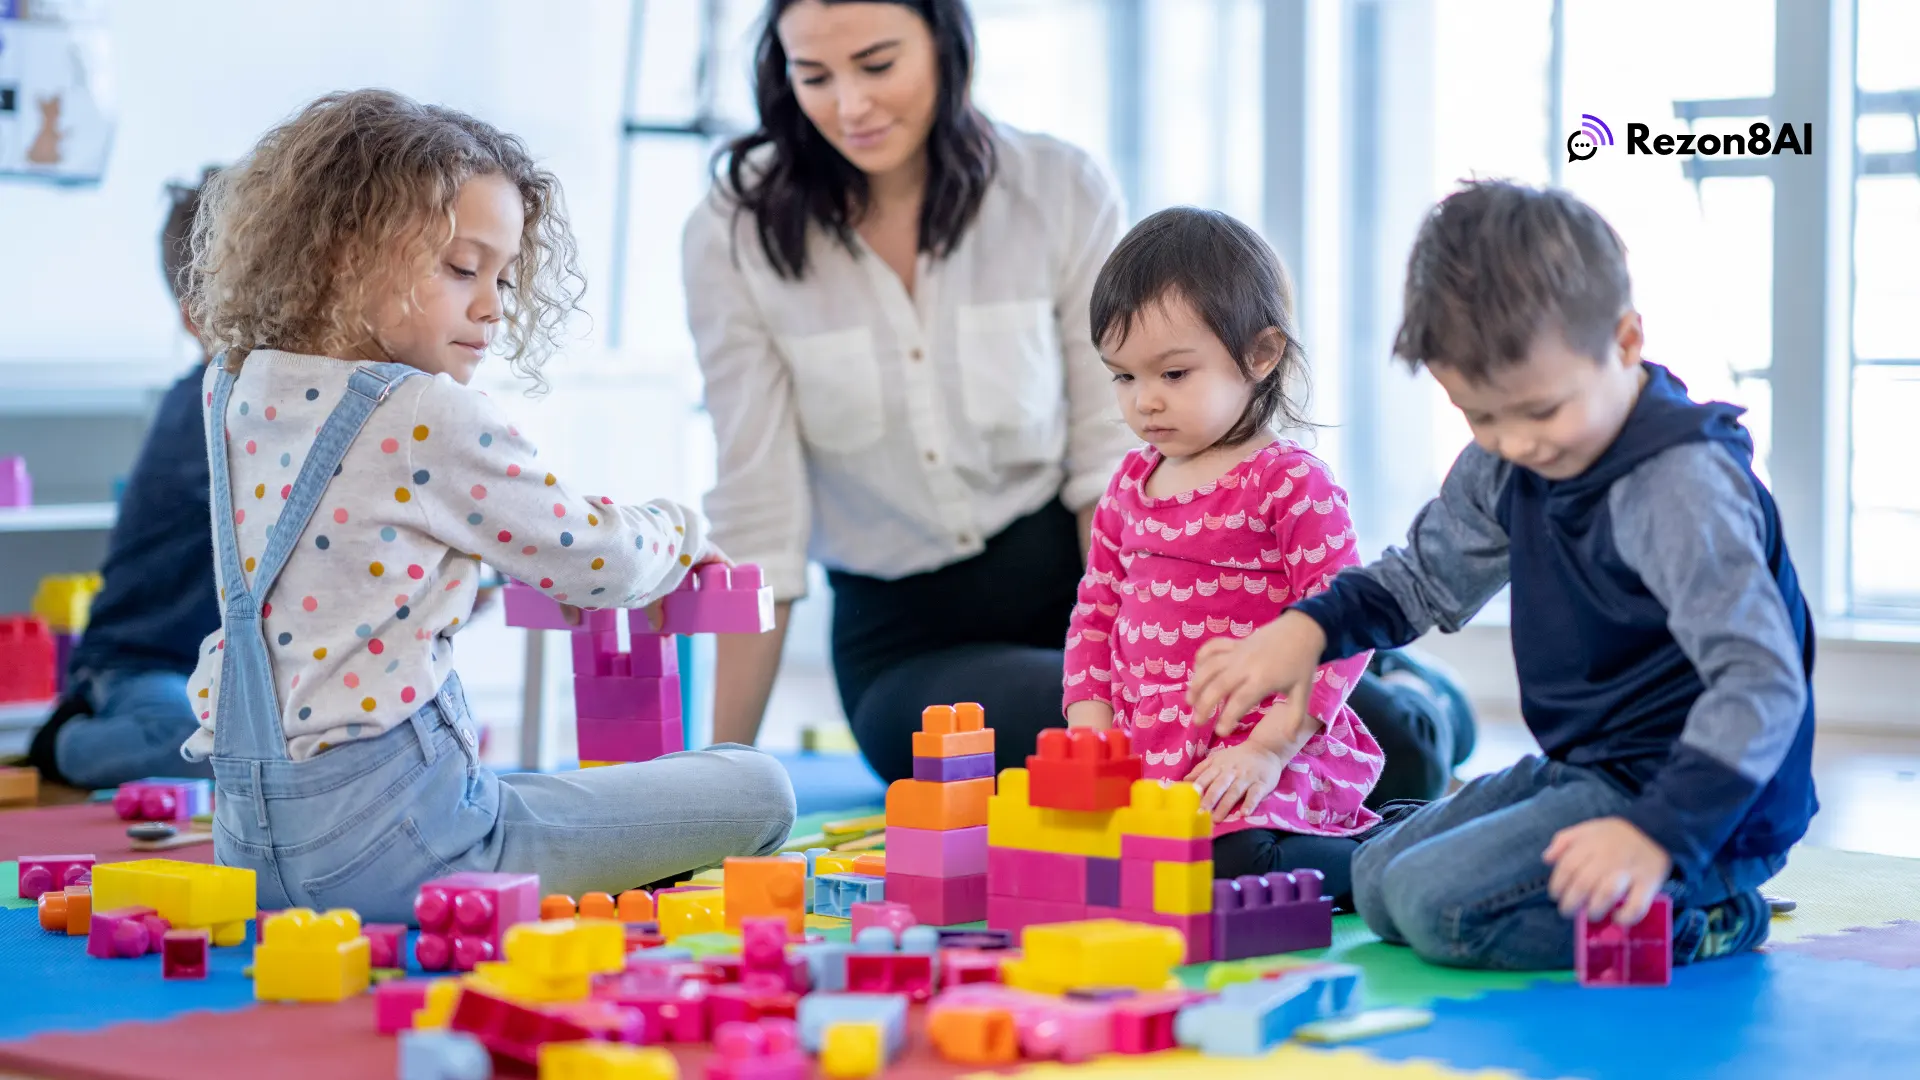 Children and carer in a childcare setting playing with building blocks